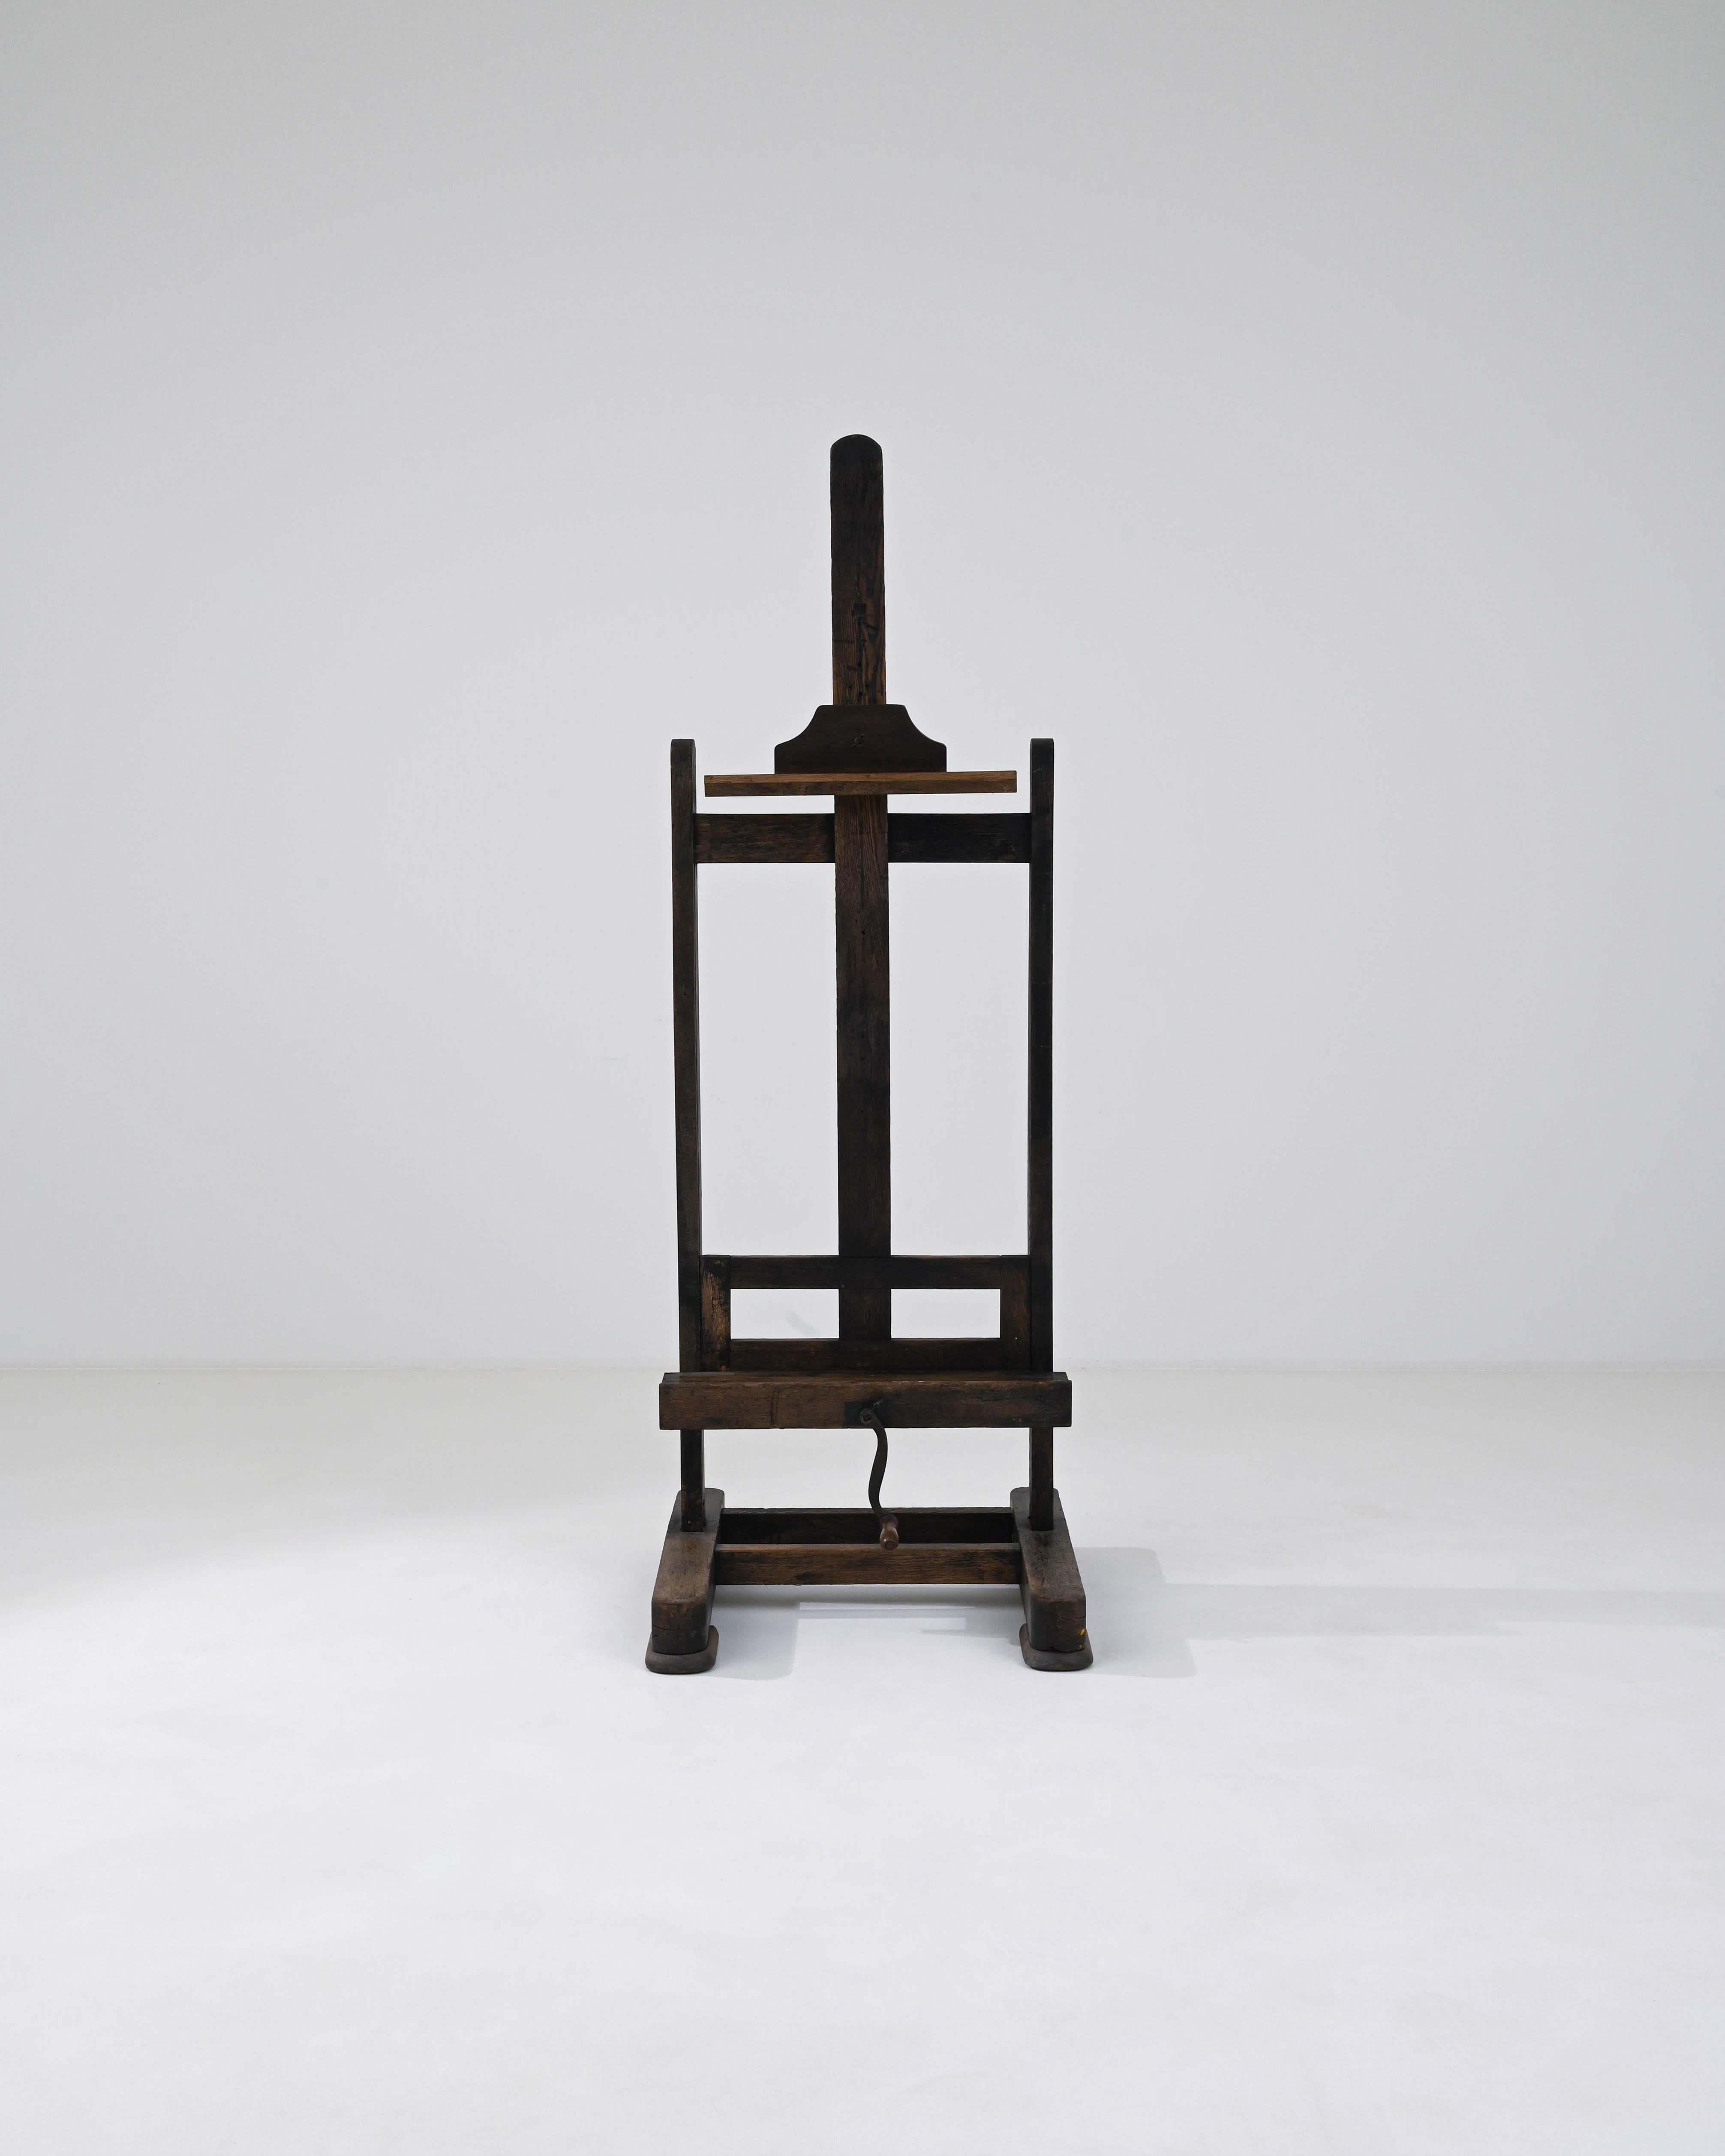 This wooden easel provides a bohemian accent or a practical accessory with a nostalgic touch. A wooden easel made in France during the 20th century, standing upright with a composed posture, this adjustable easel is ready for its next job. Warm,